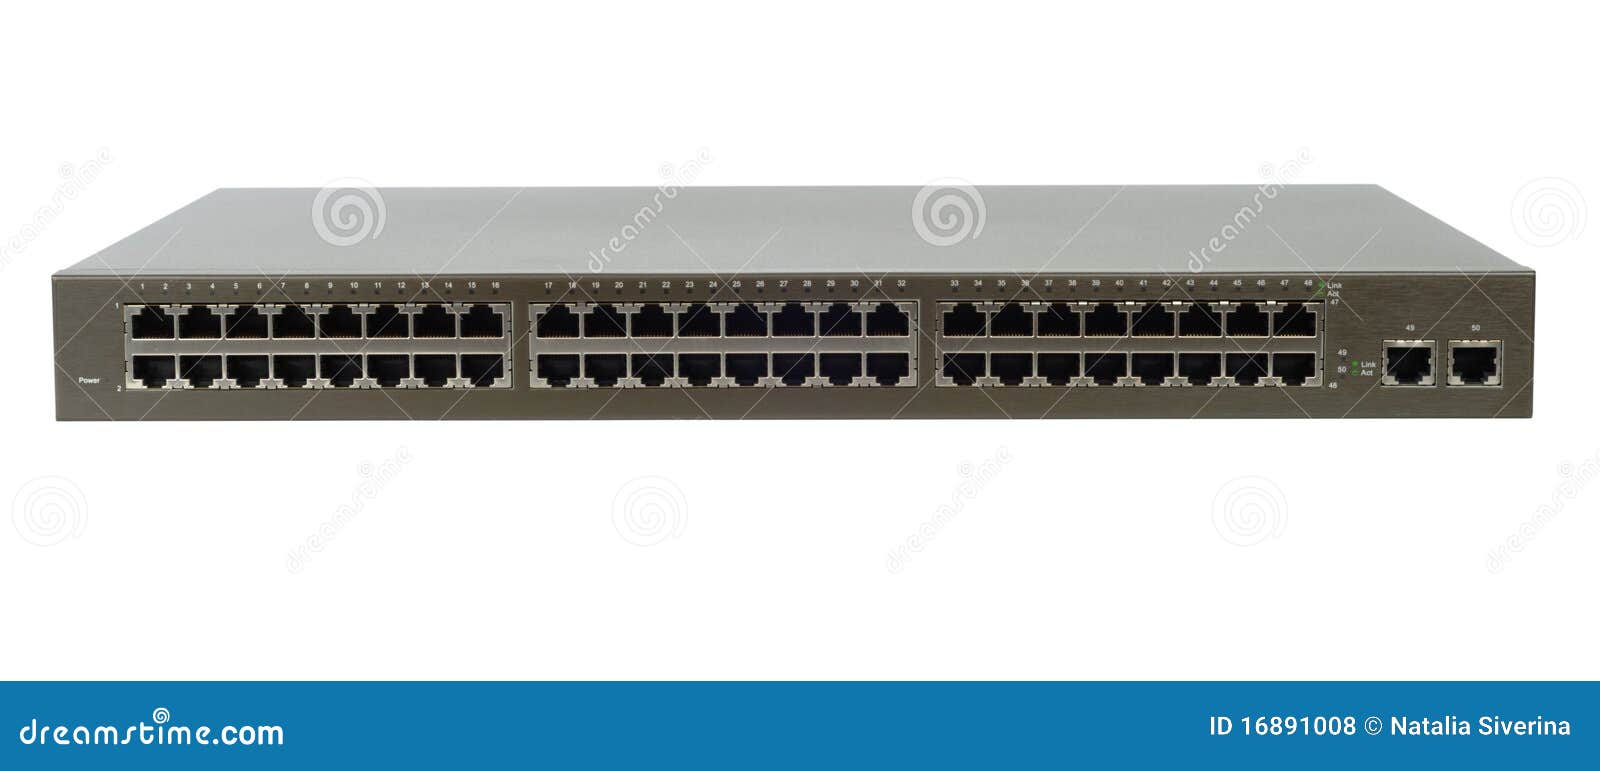 free clipart network switch - photo #33